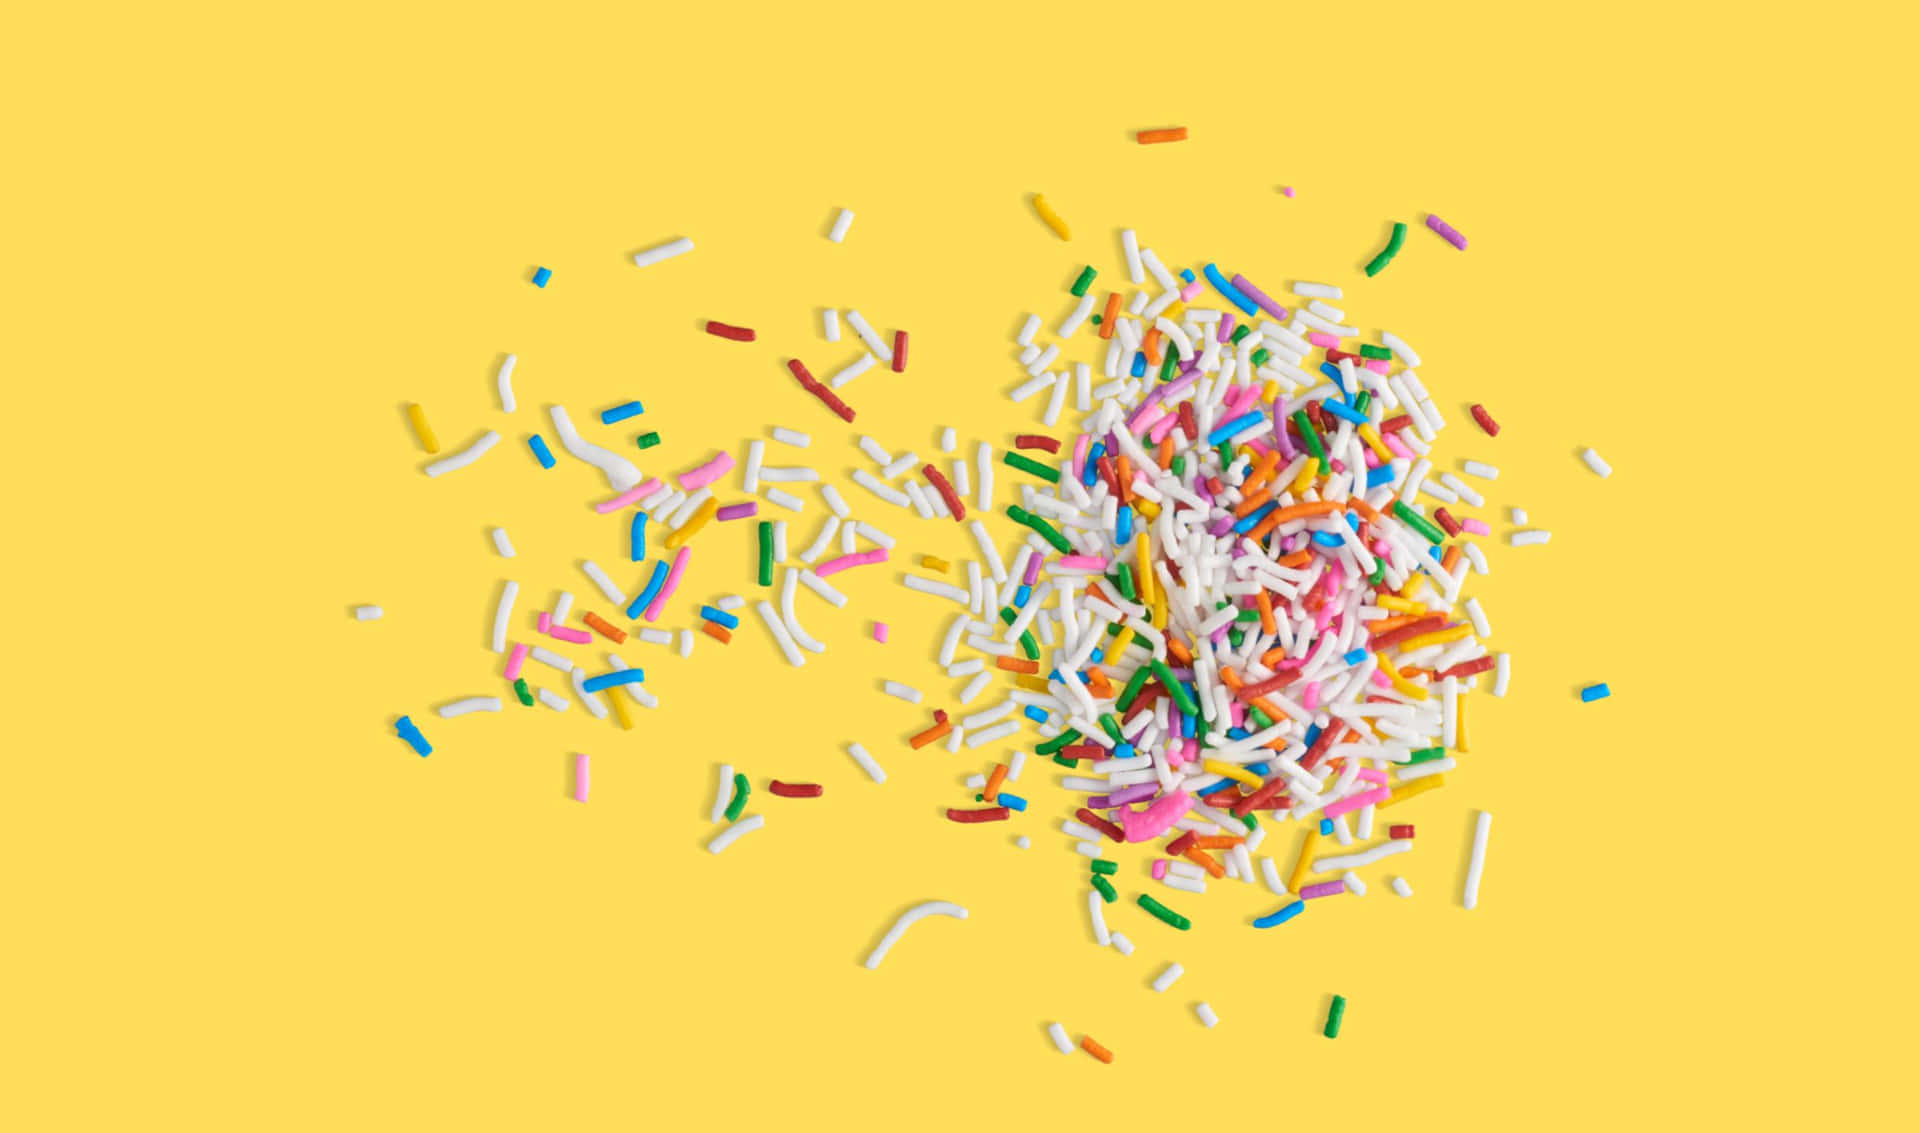 Scattered Sprinkles On Yellow Background